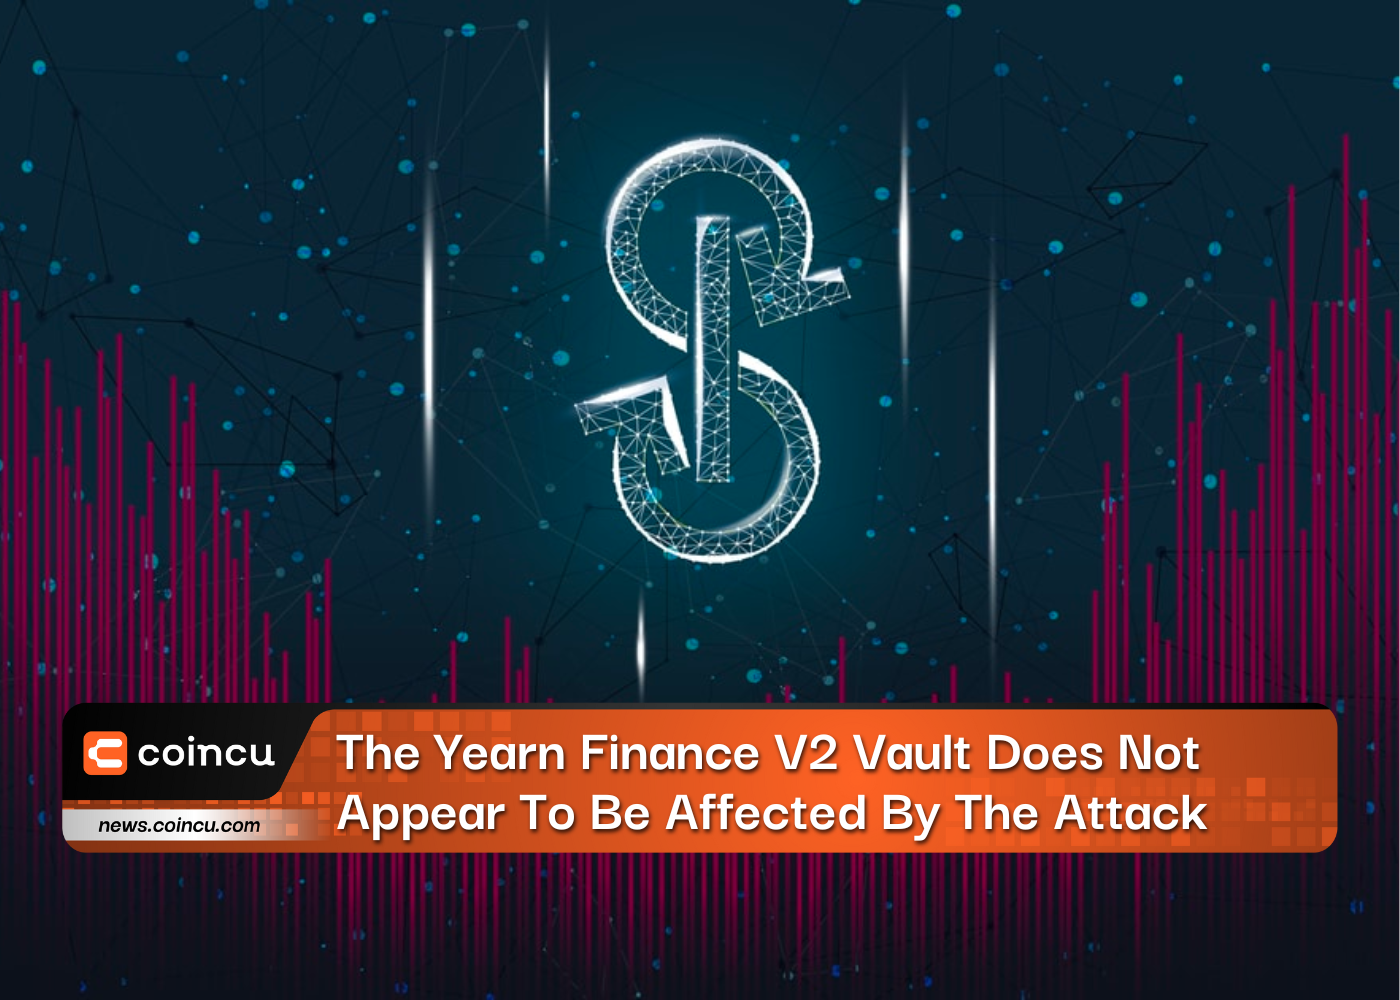 The Yearn Finance V2 Vault Does Not Appear To Be Affected By The Attack